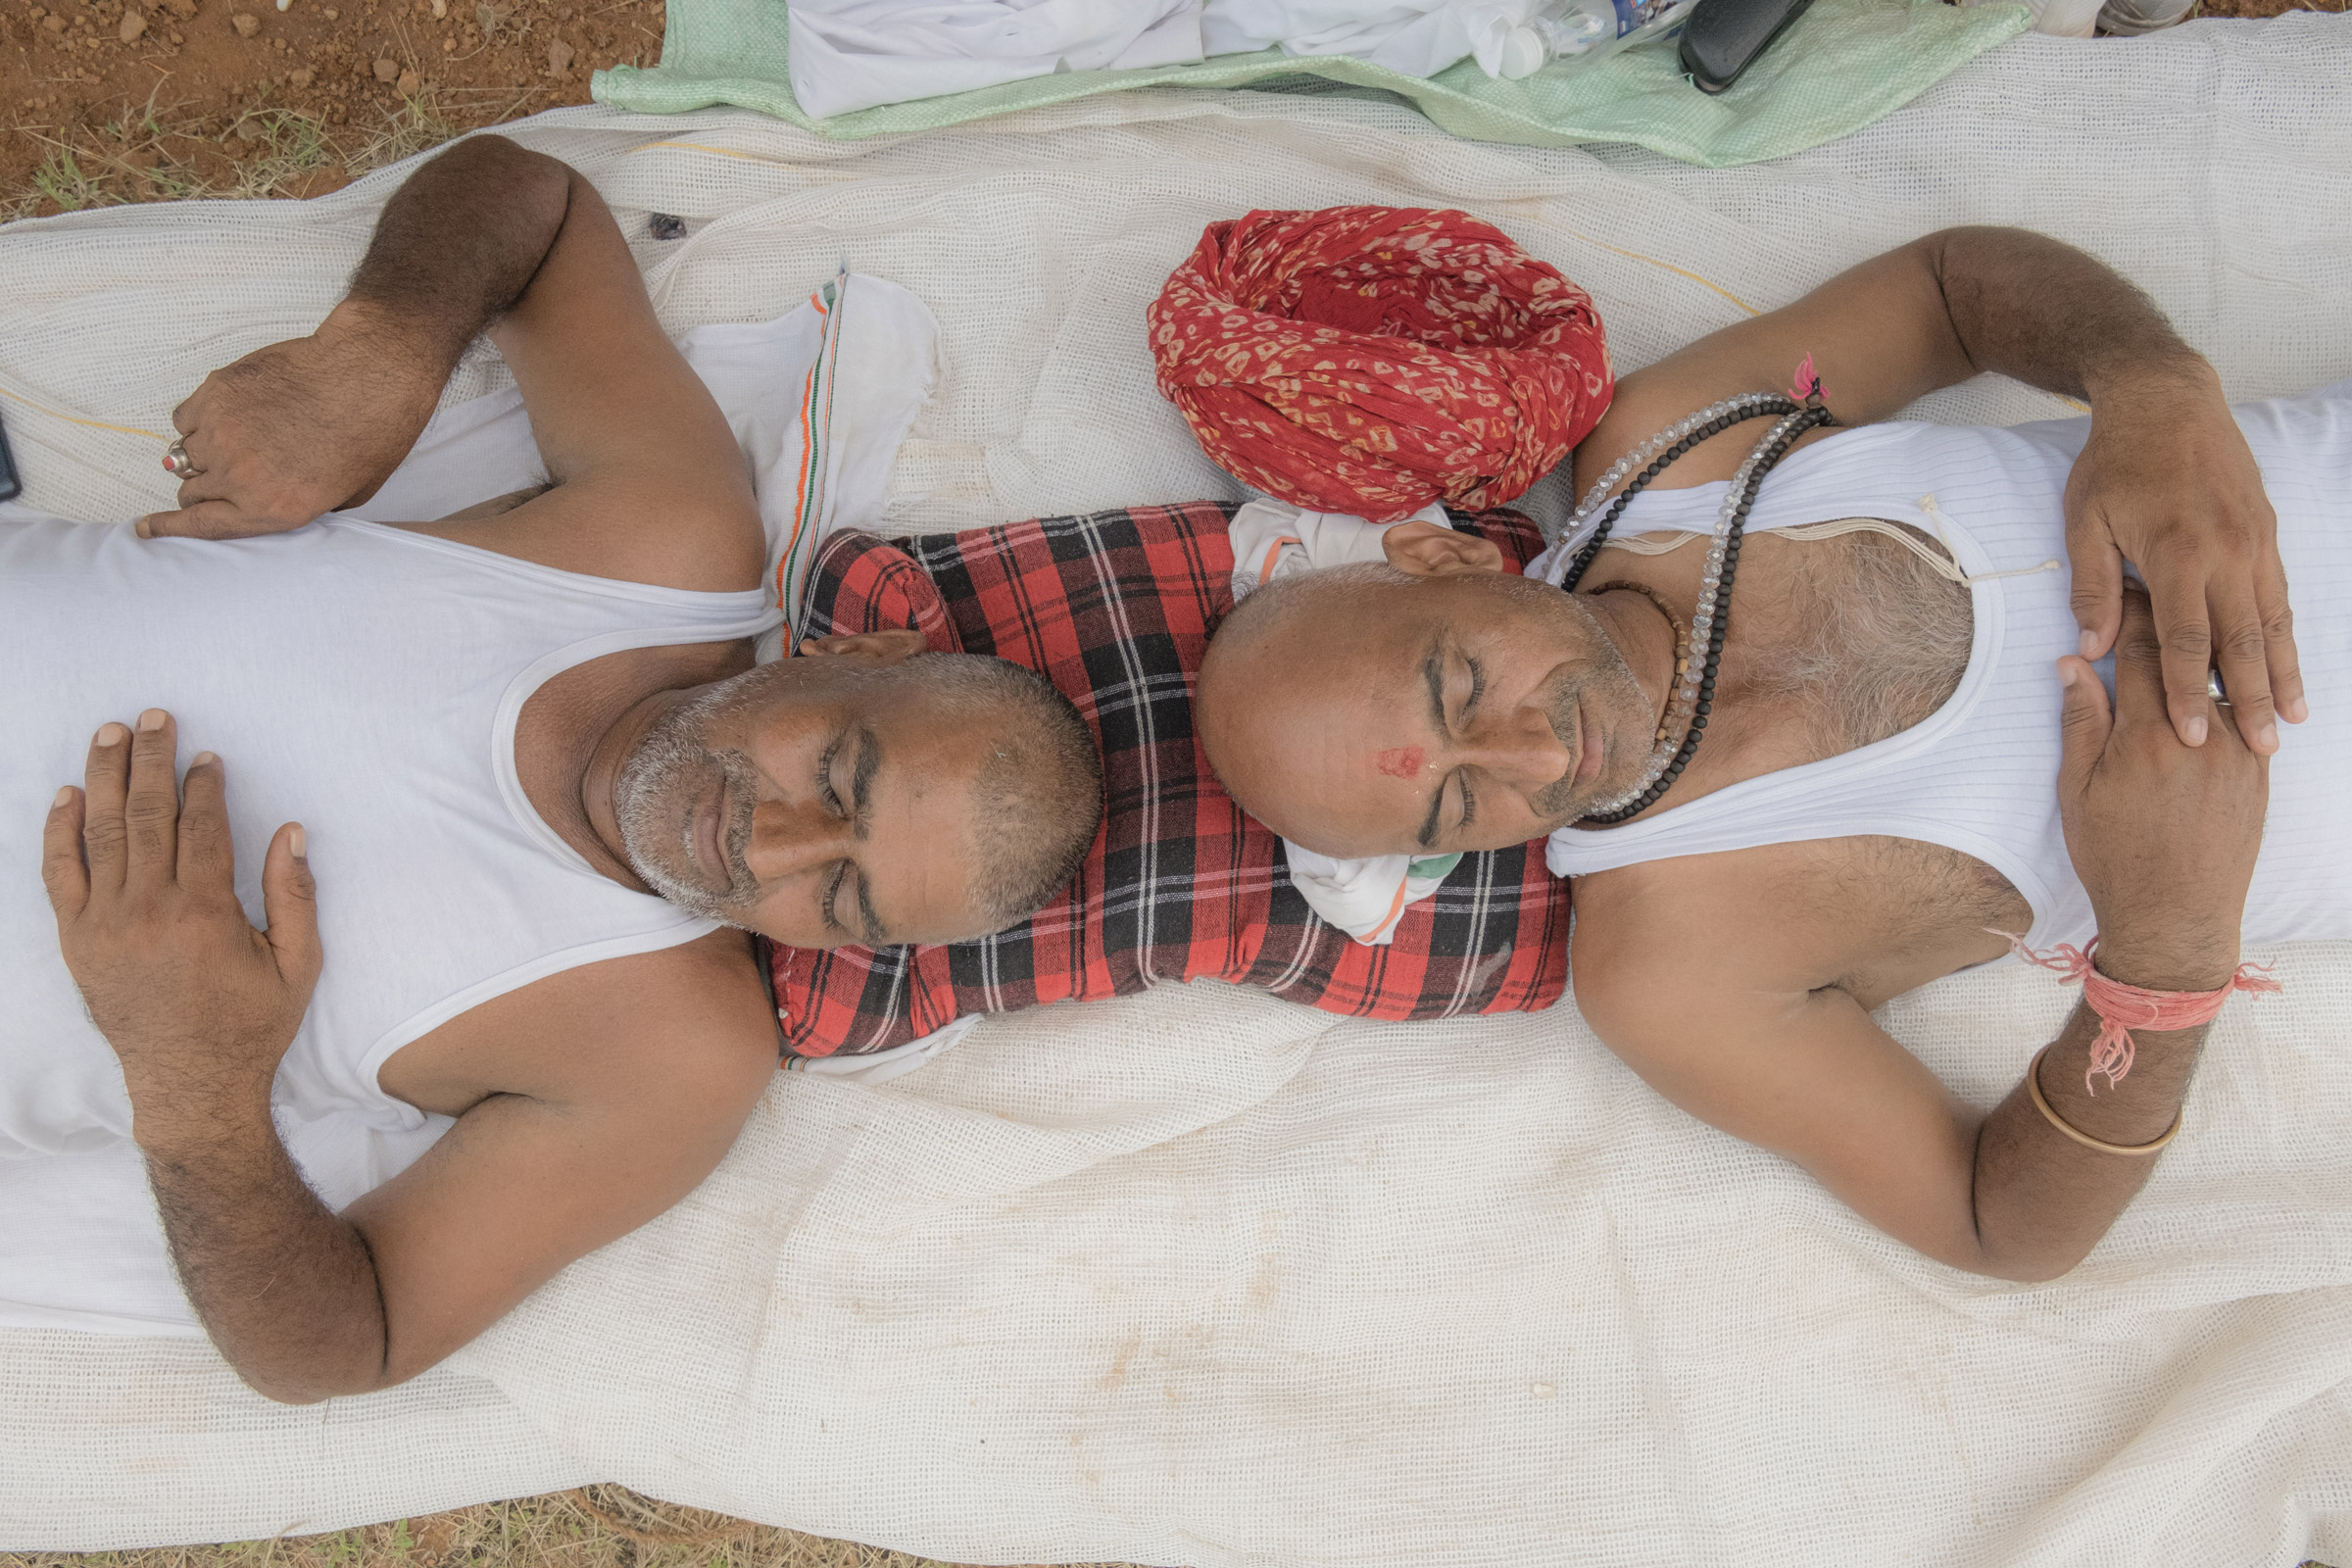 Shatrugan Sharma and Sravankumar Gujjar, from the state of Rajasthan, share a pillow while resting at a tent for the participants of the Bharat Jodo Yatra near Giriyammanahally Village in Karnataka, India, on Oct. 12, 2022. (Ronny Sen for TIME)